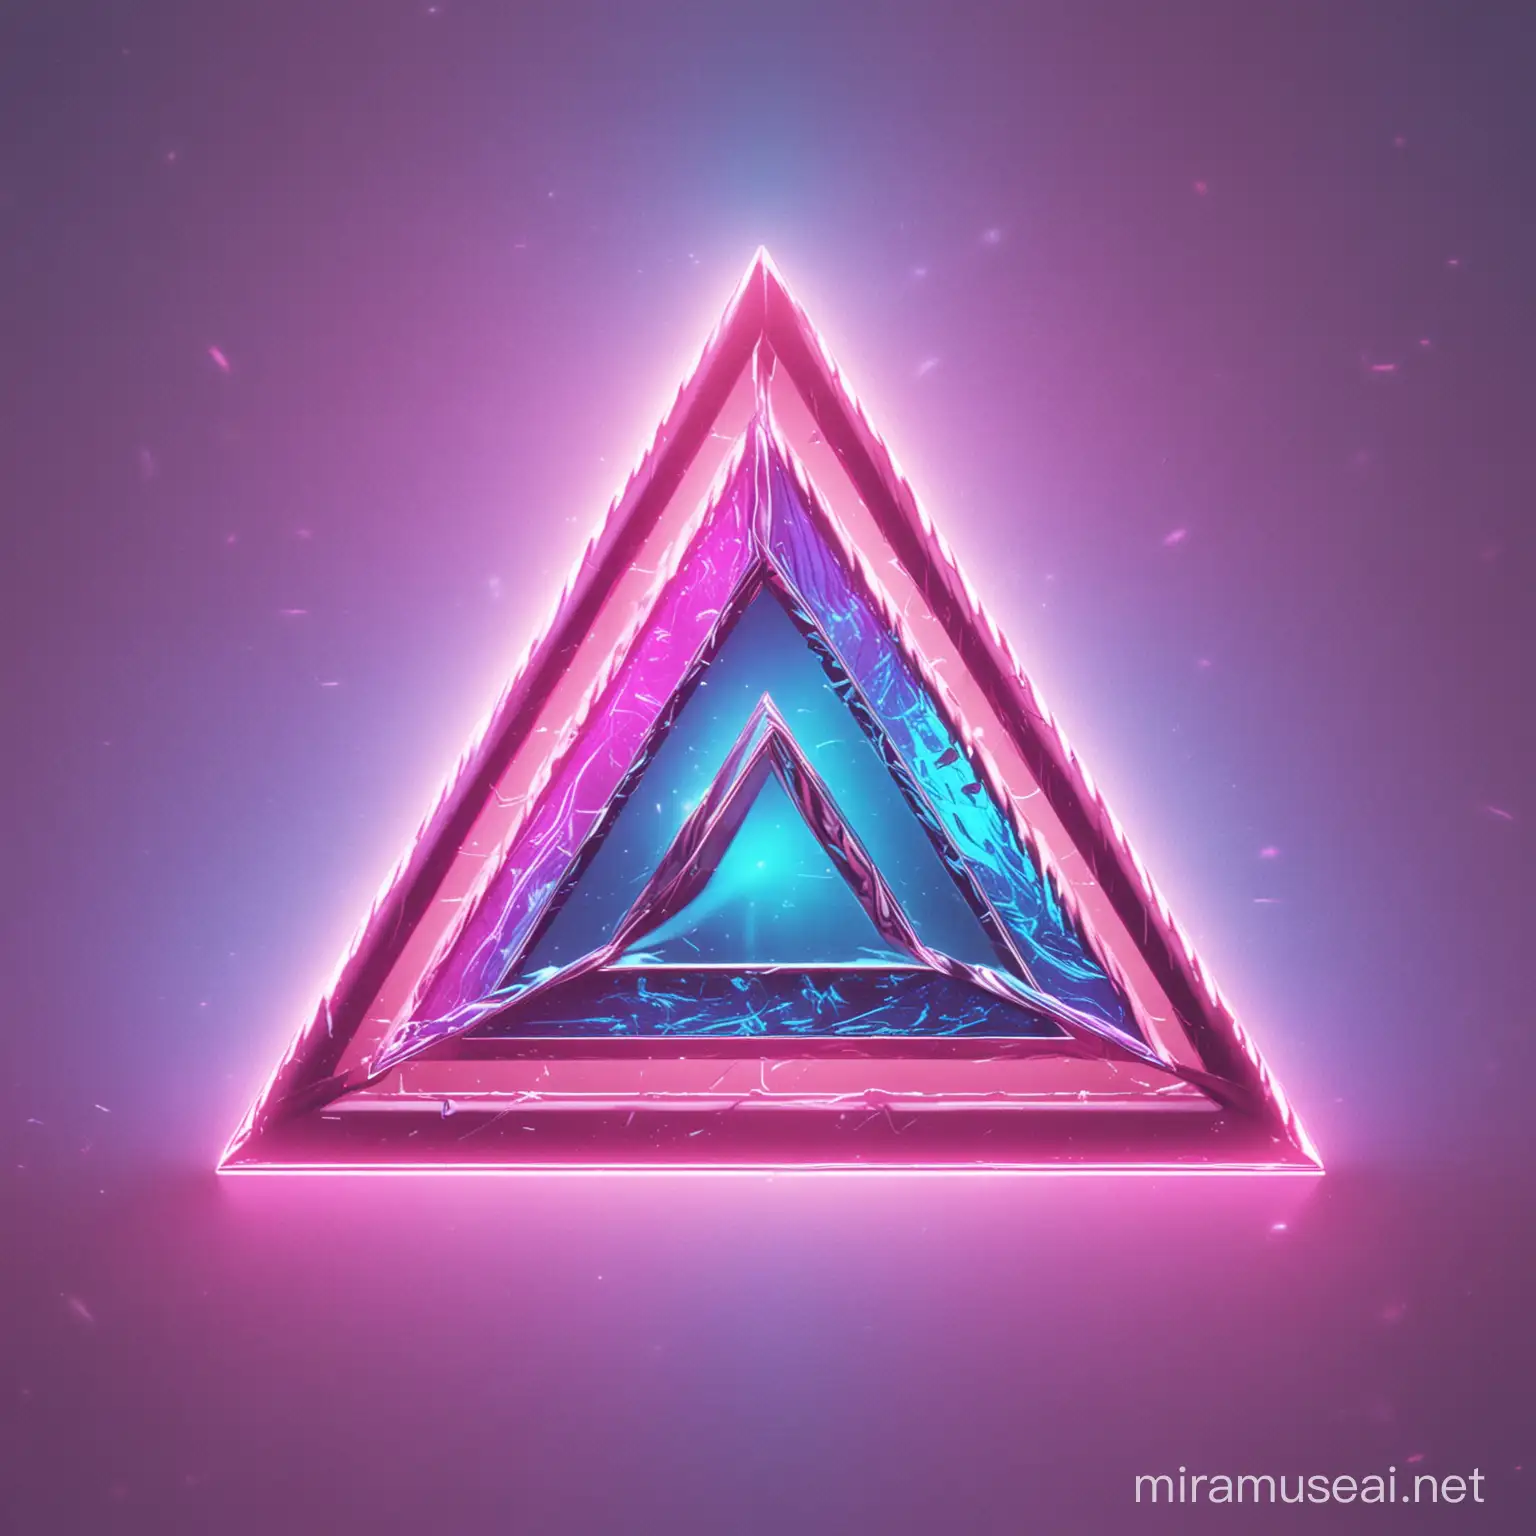 Pink and Chrome Vaporwave Triangle Logo with Shiny Aesthetic Lights